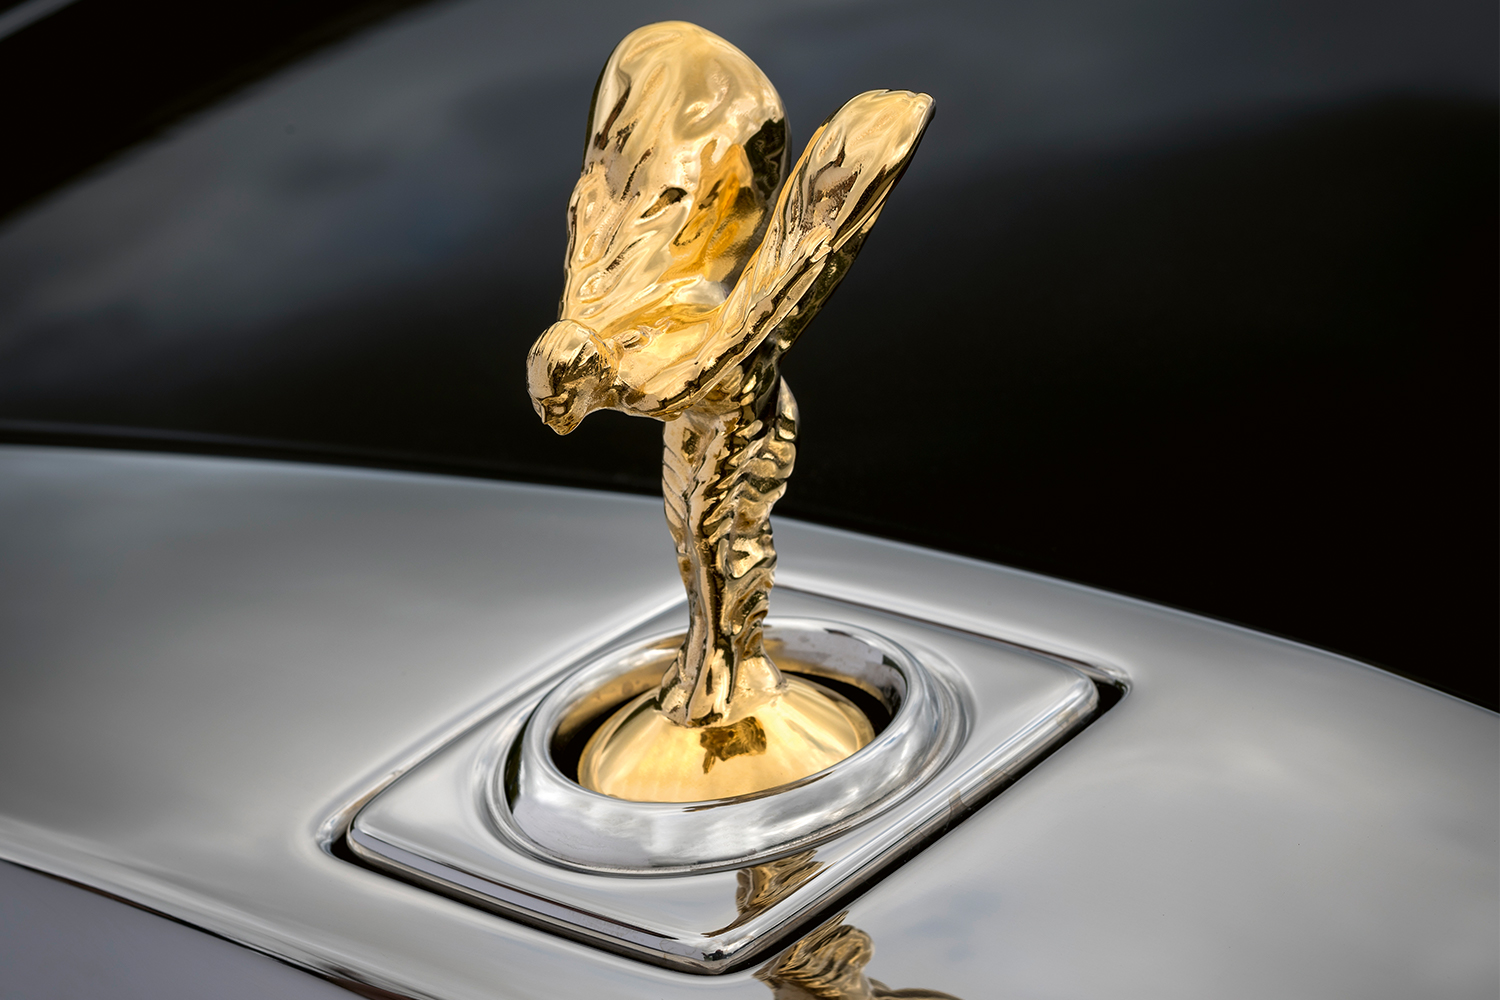 How Much is a Rolls-Royce?